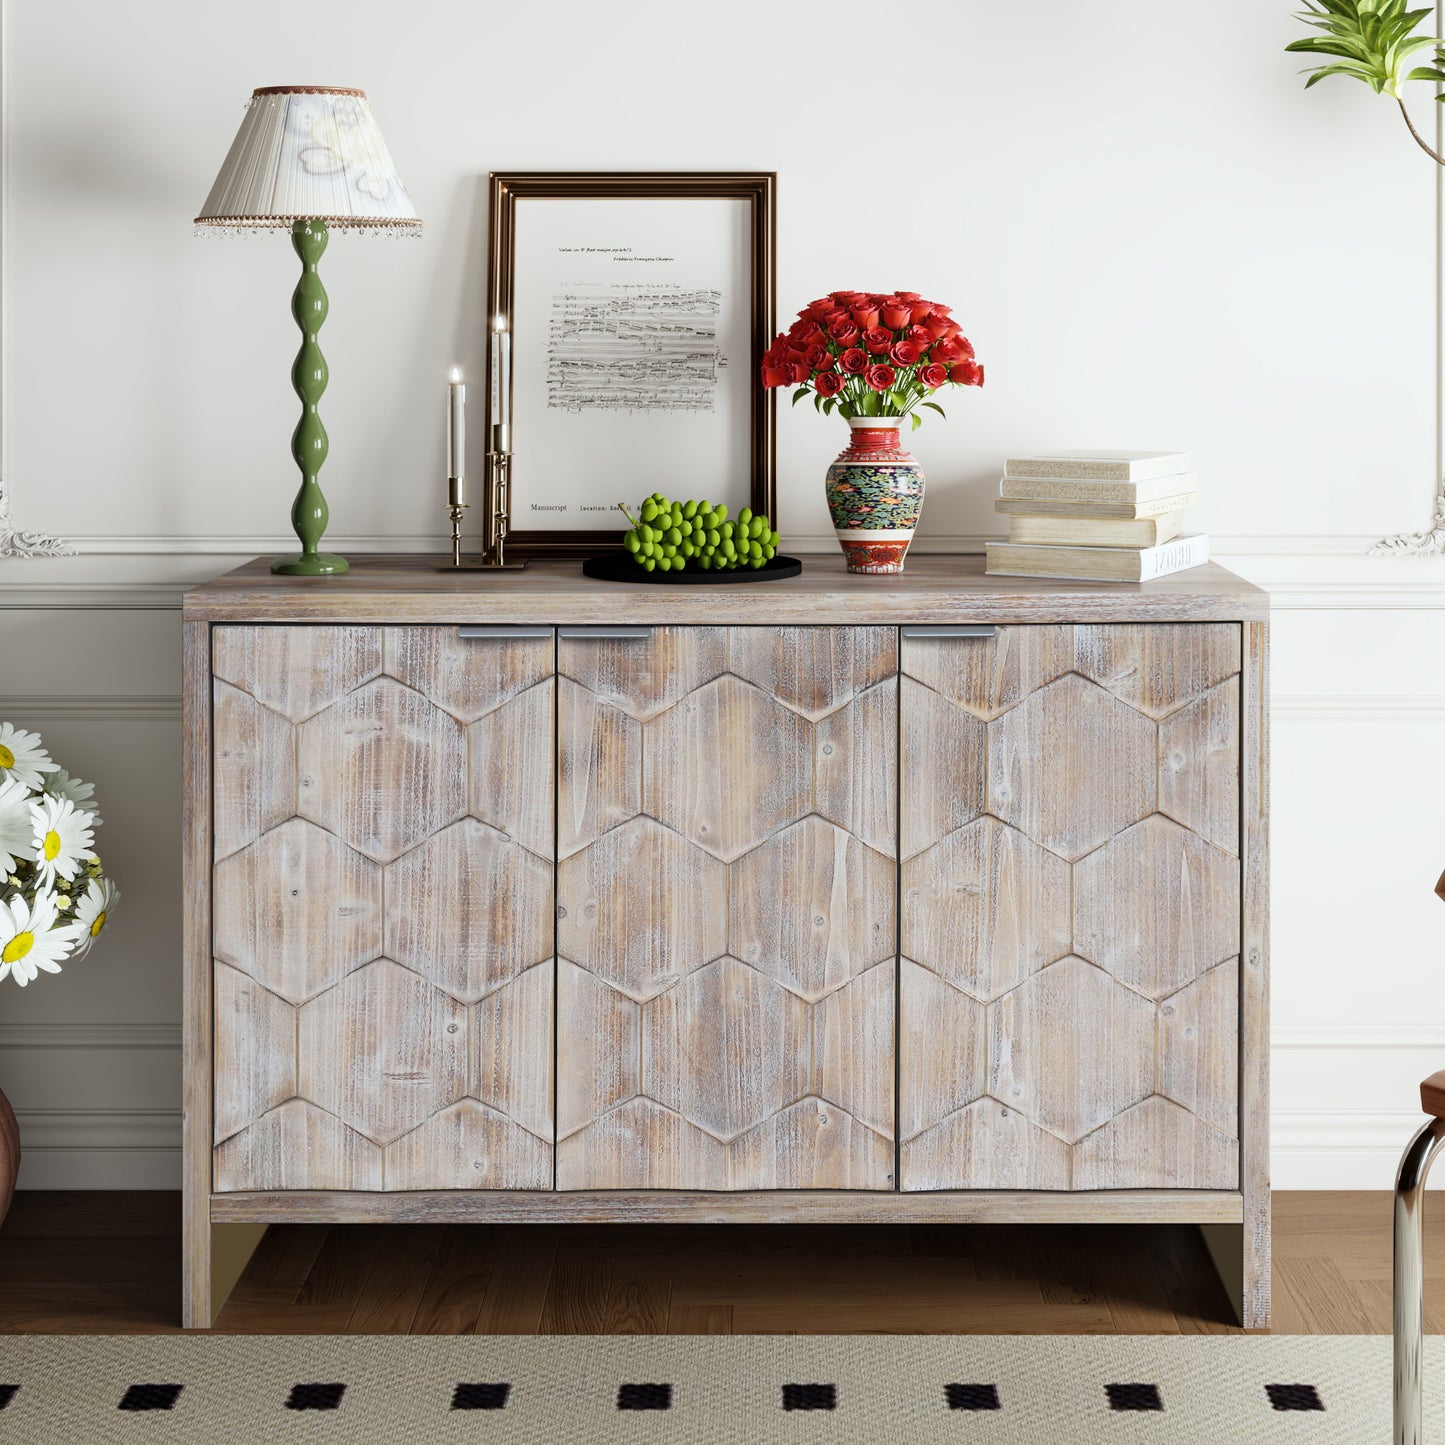 Countryside Elegance 3-Door Buffet Sideboard – Sophisticated Storage with Natural Wood Grain for Contemporary Homes